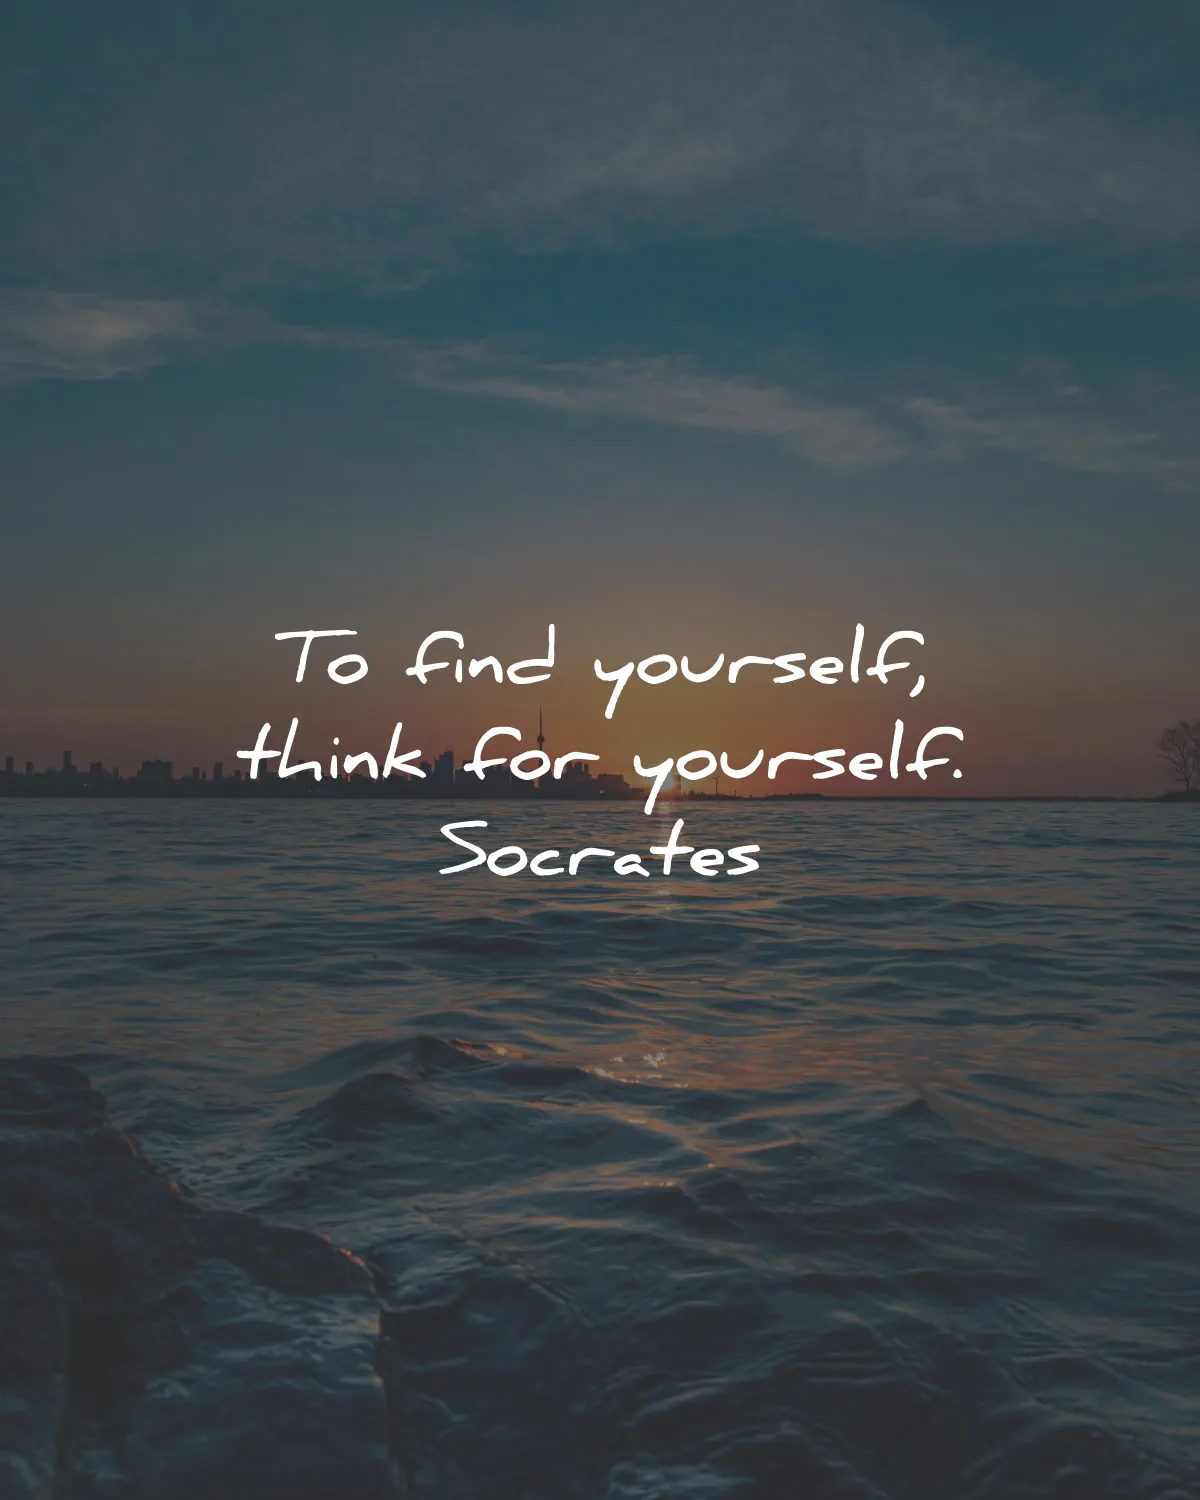 socrates quotes find yourself think wisdom